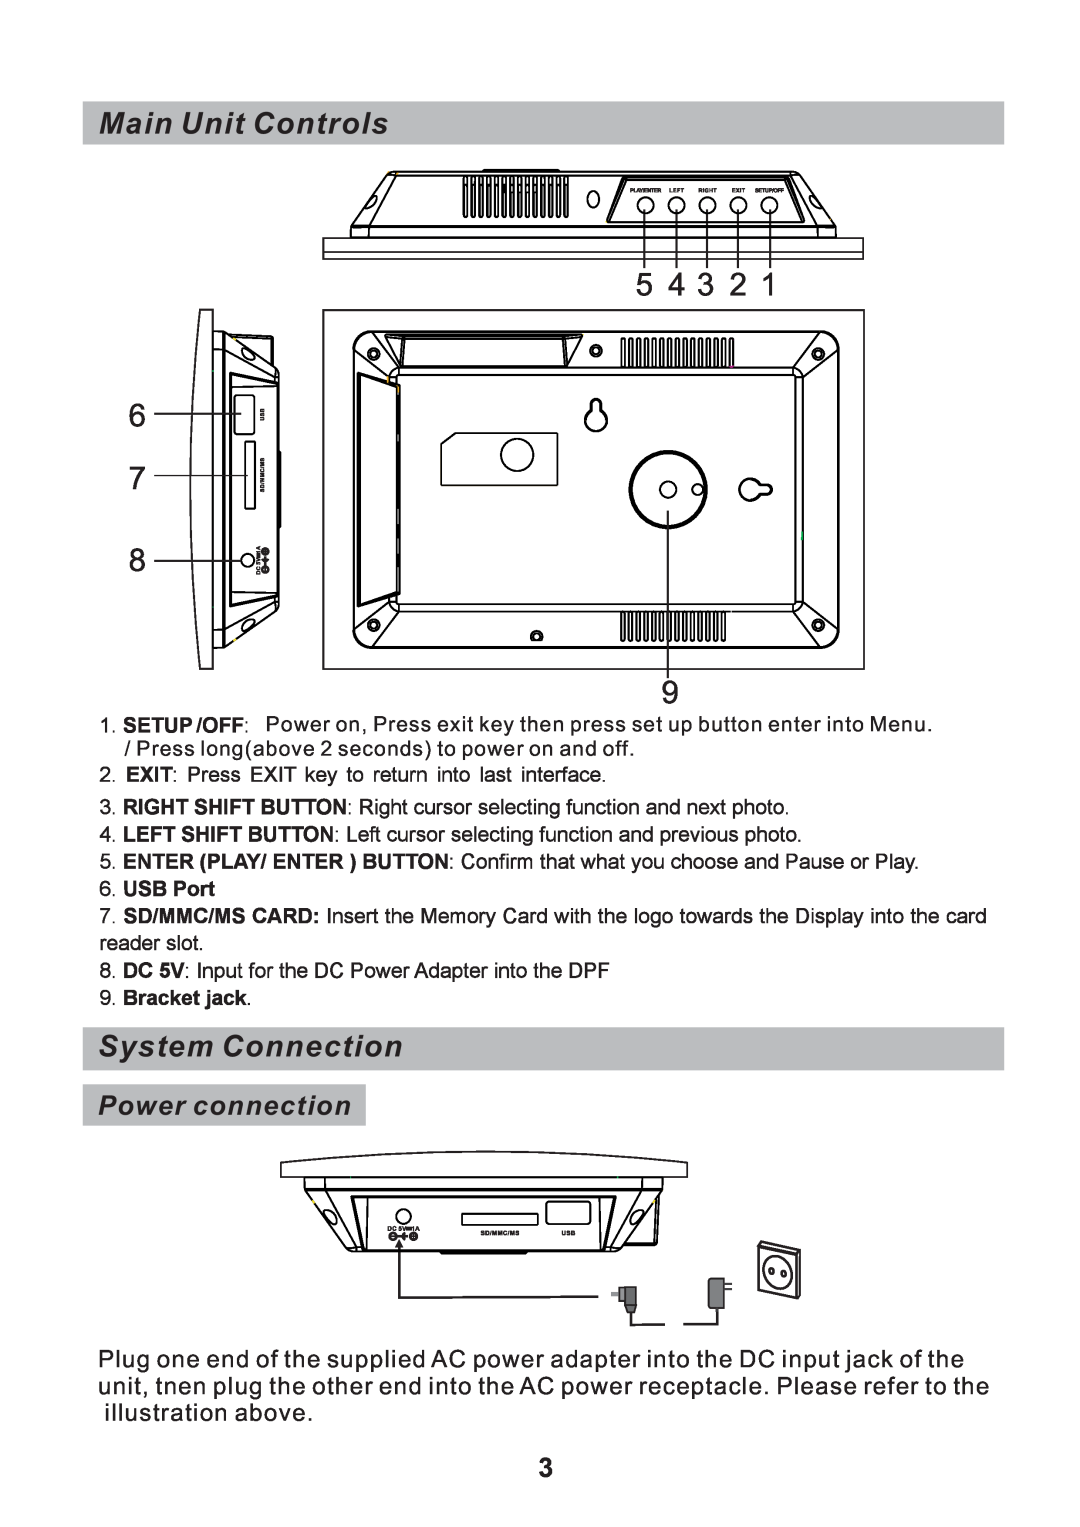 Sylvania SDPF751B user manual Main Unit Controls, System Connection, Power connection 